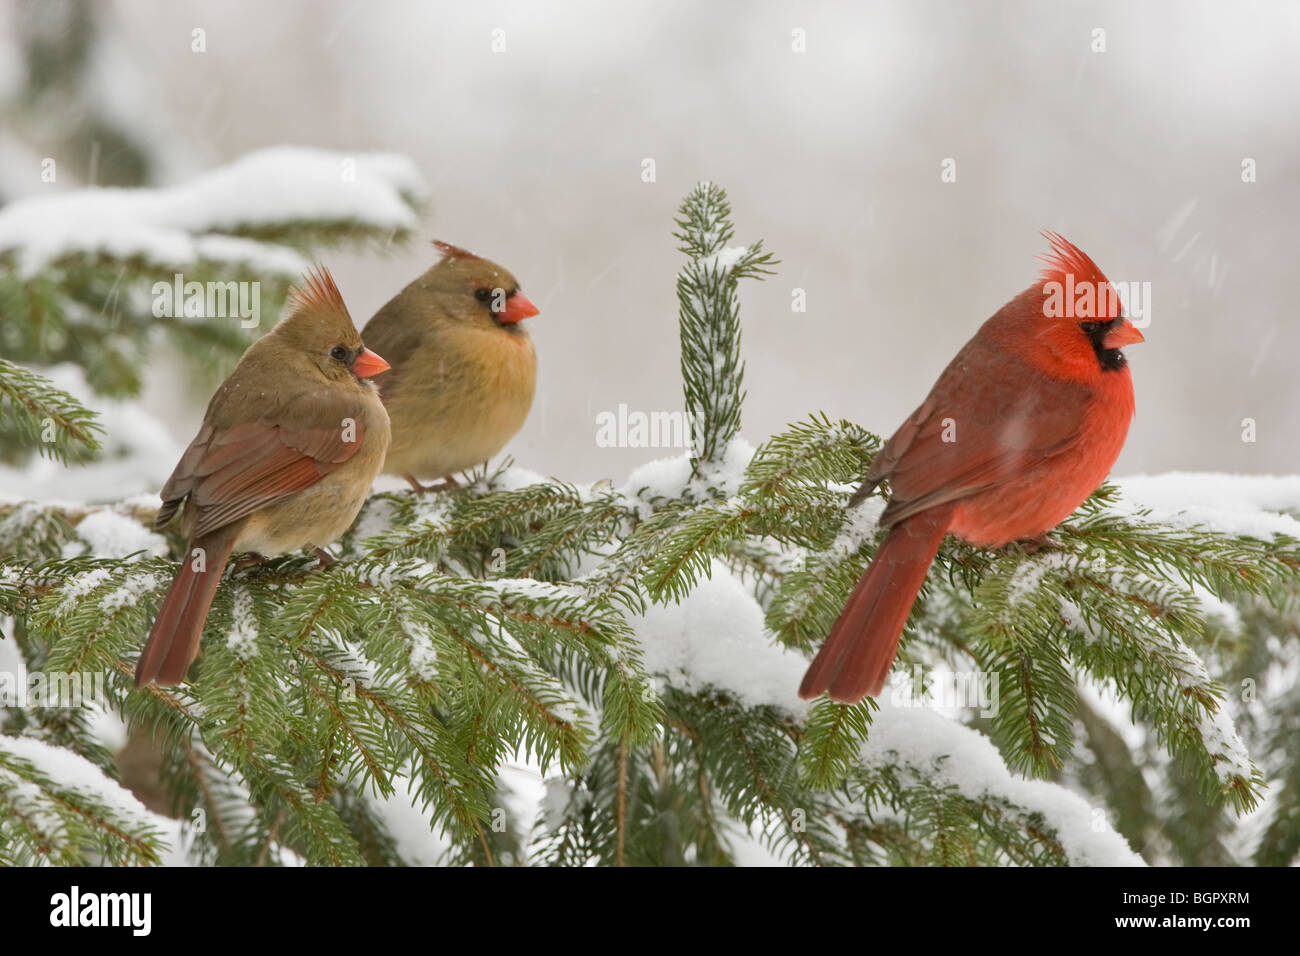 Three Northern Cardinals perched in Spruce tree and falling snow Stock Photo